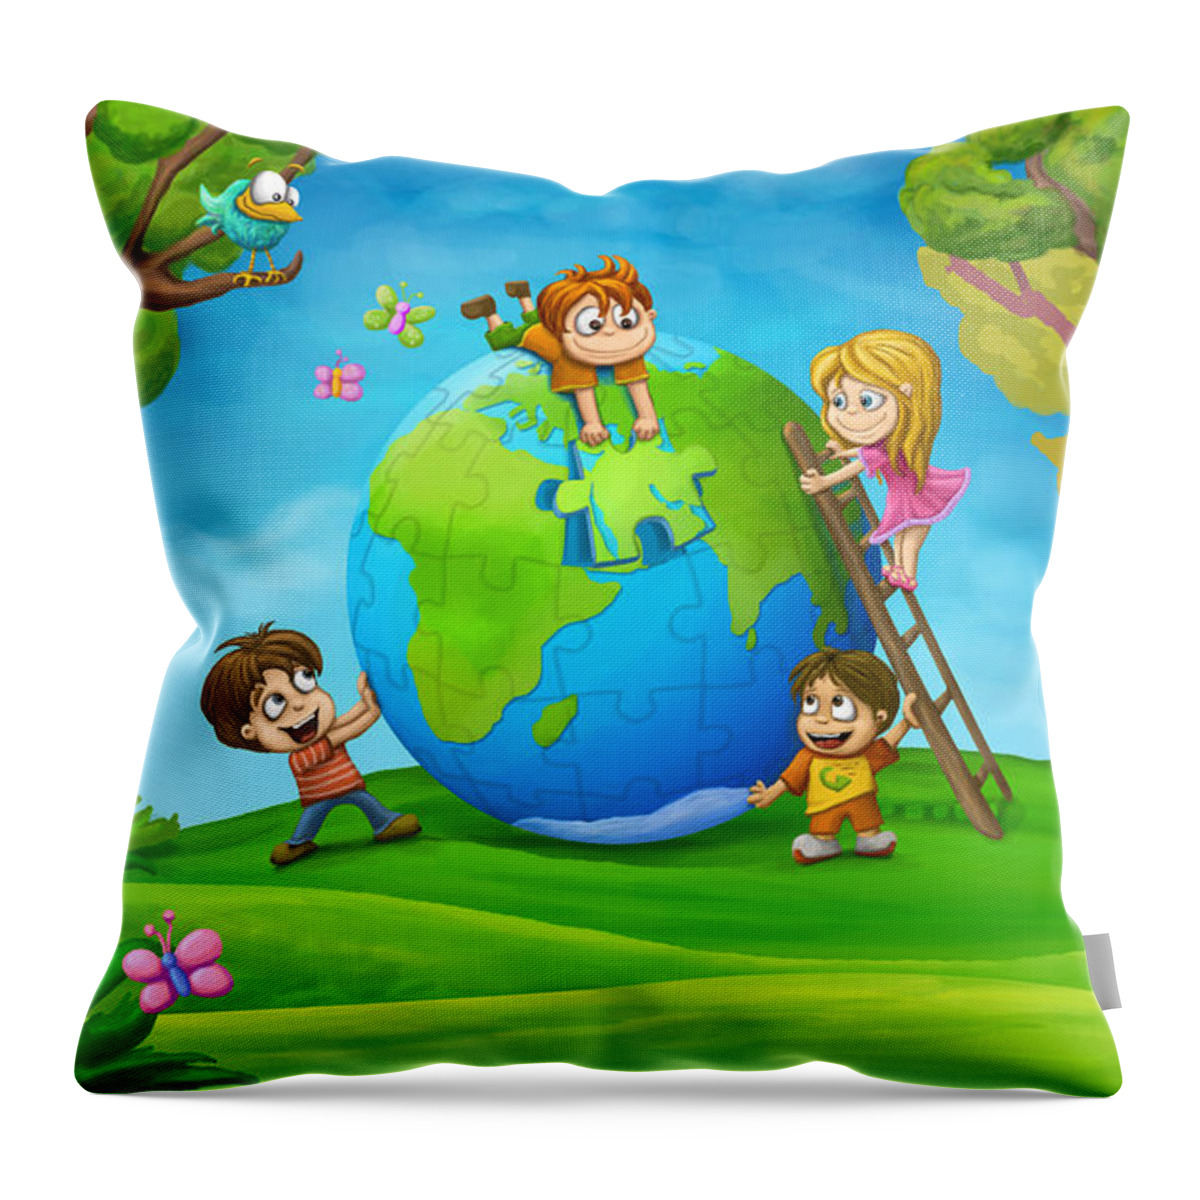 Forest Throw Pillow featuring the digital art Puzzle World by Tooshtoosh